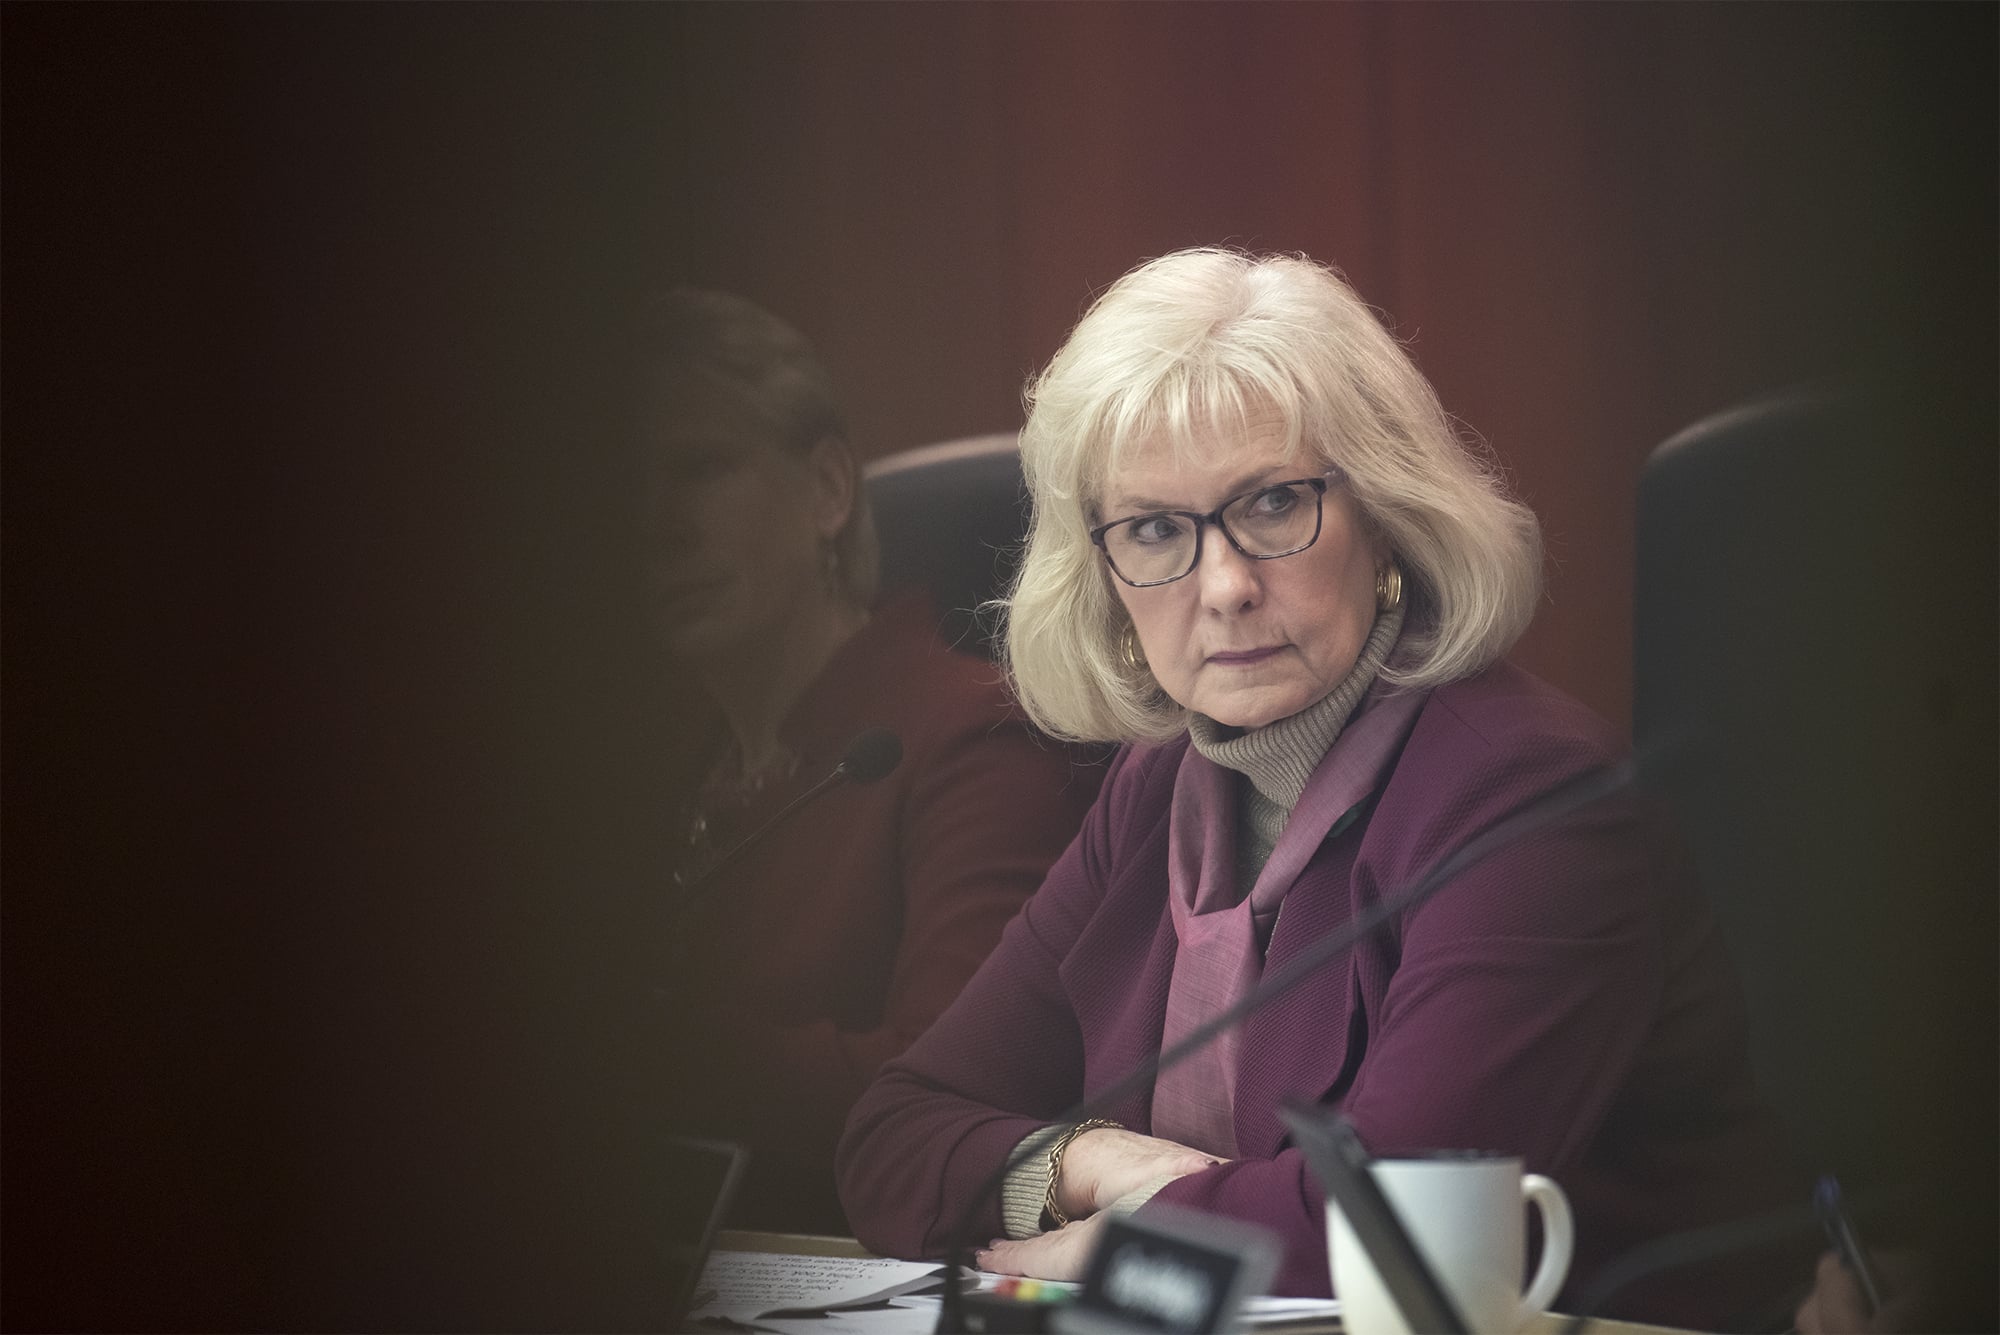 County Council Chair Eileen Quiring listens during a County Council meeting on Wednesday April 3, 2019.